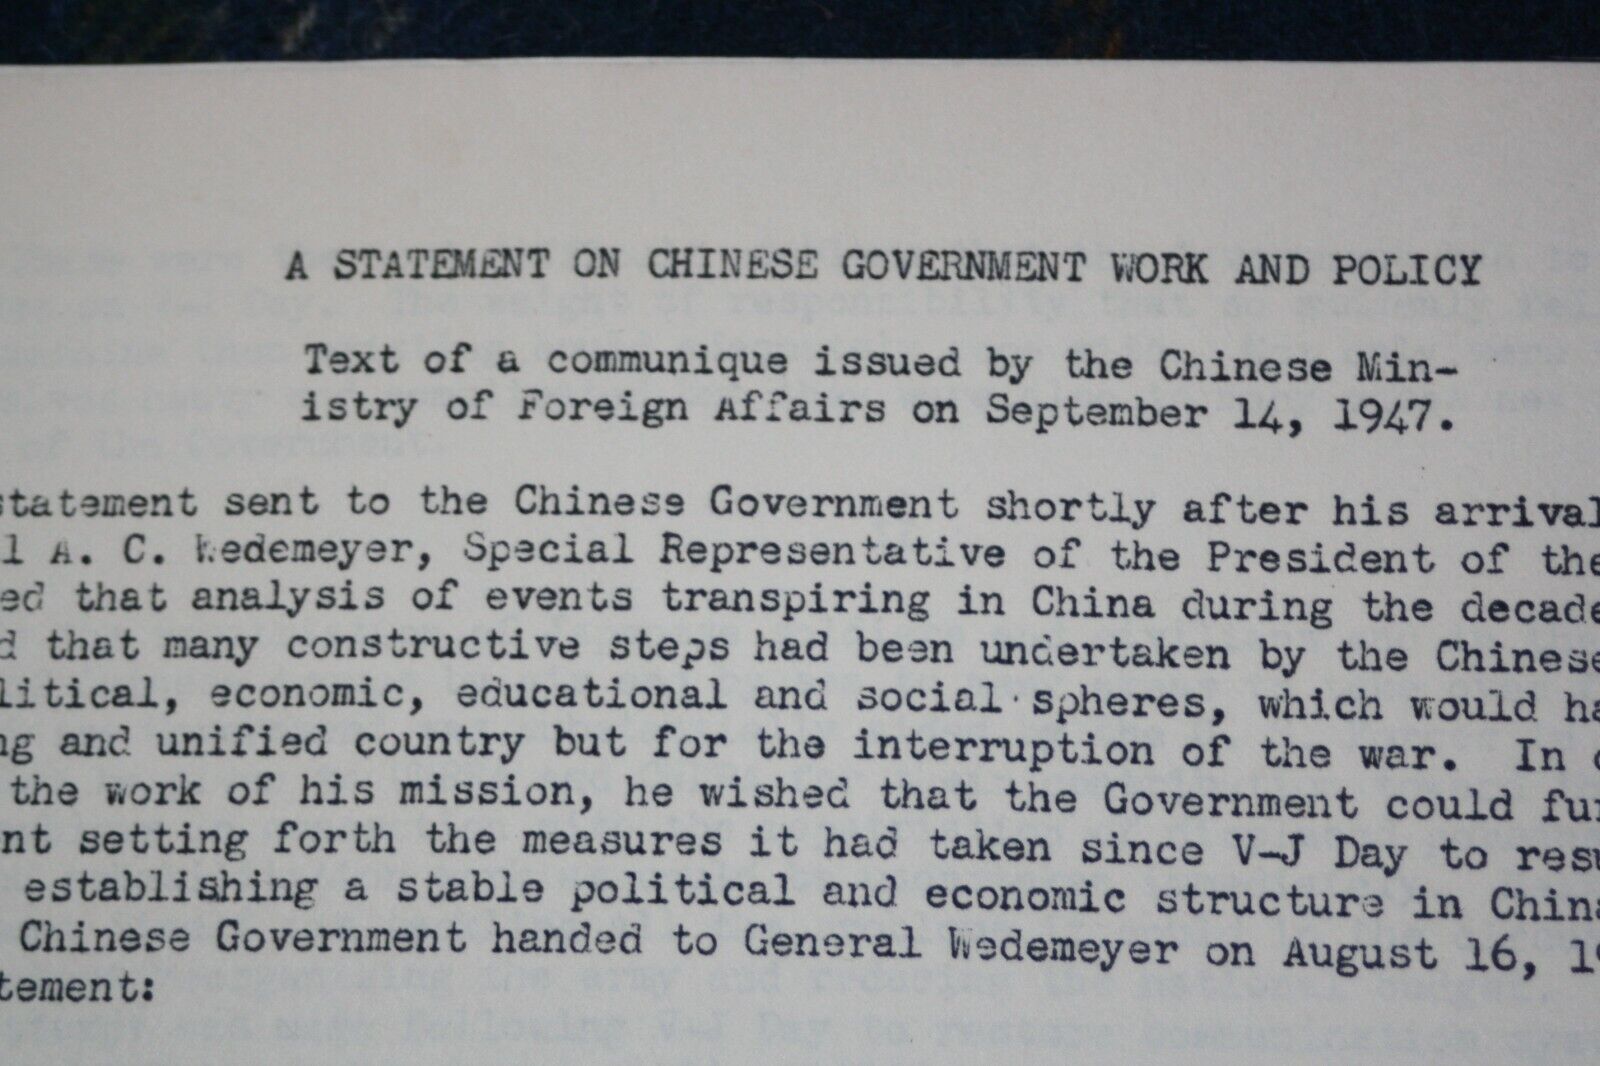 Dept. of State 1947 Intel Report-Statement of Chinese Govt Work,Policy Post WWII